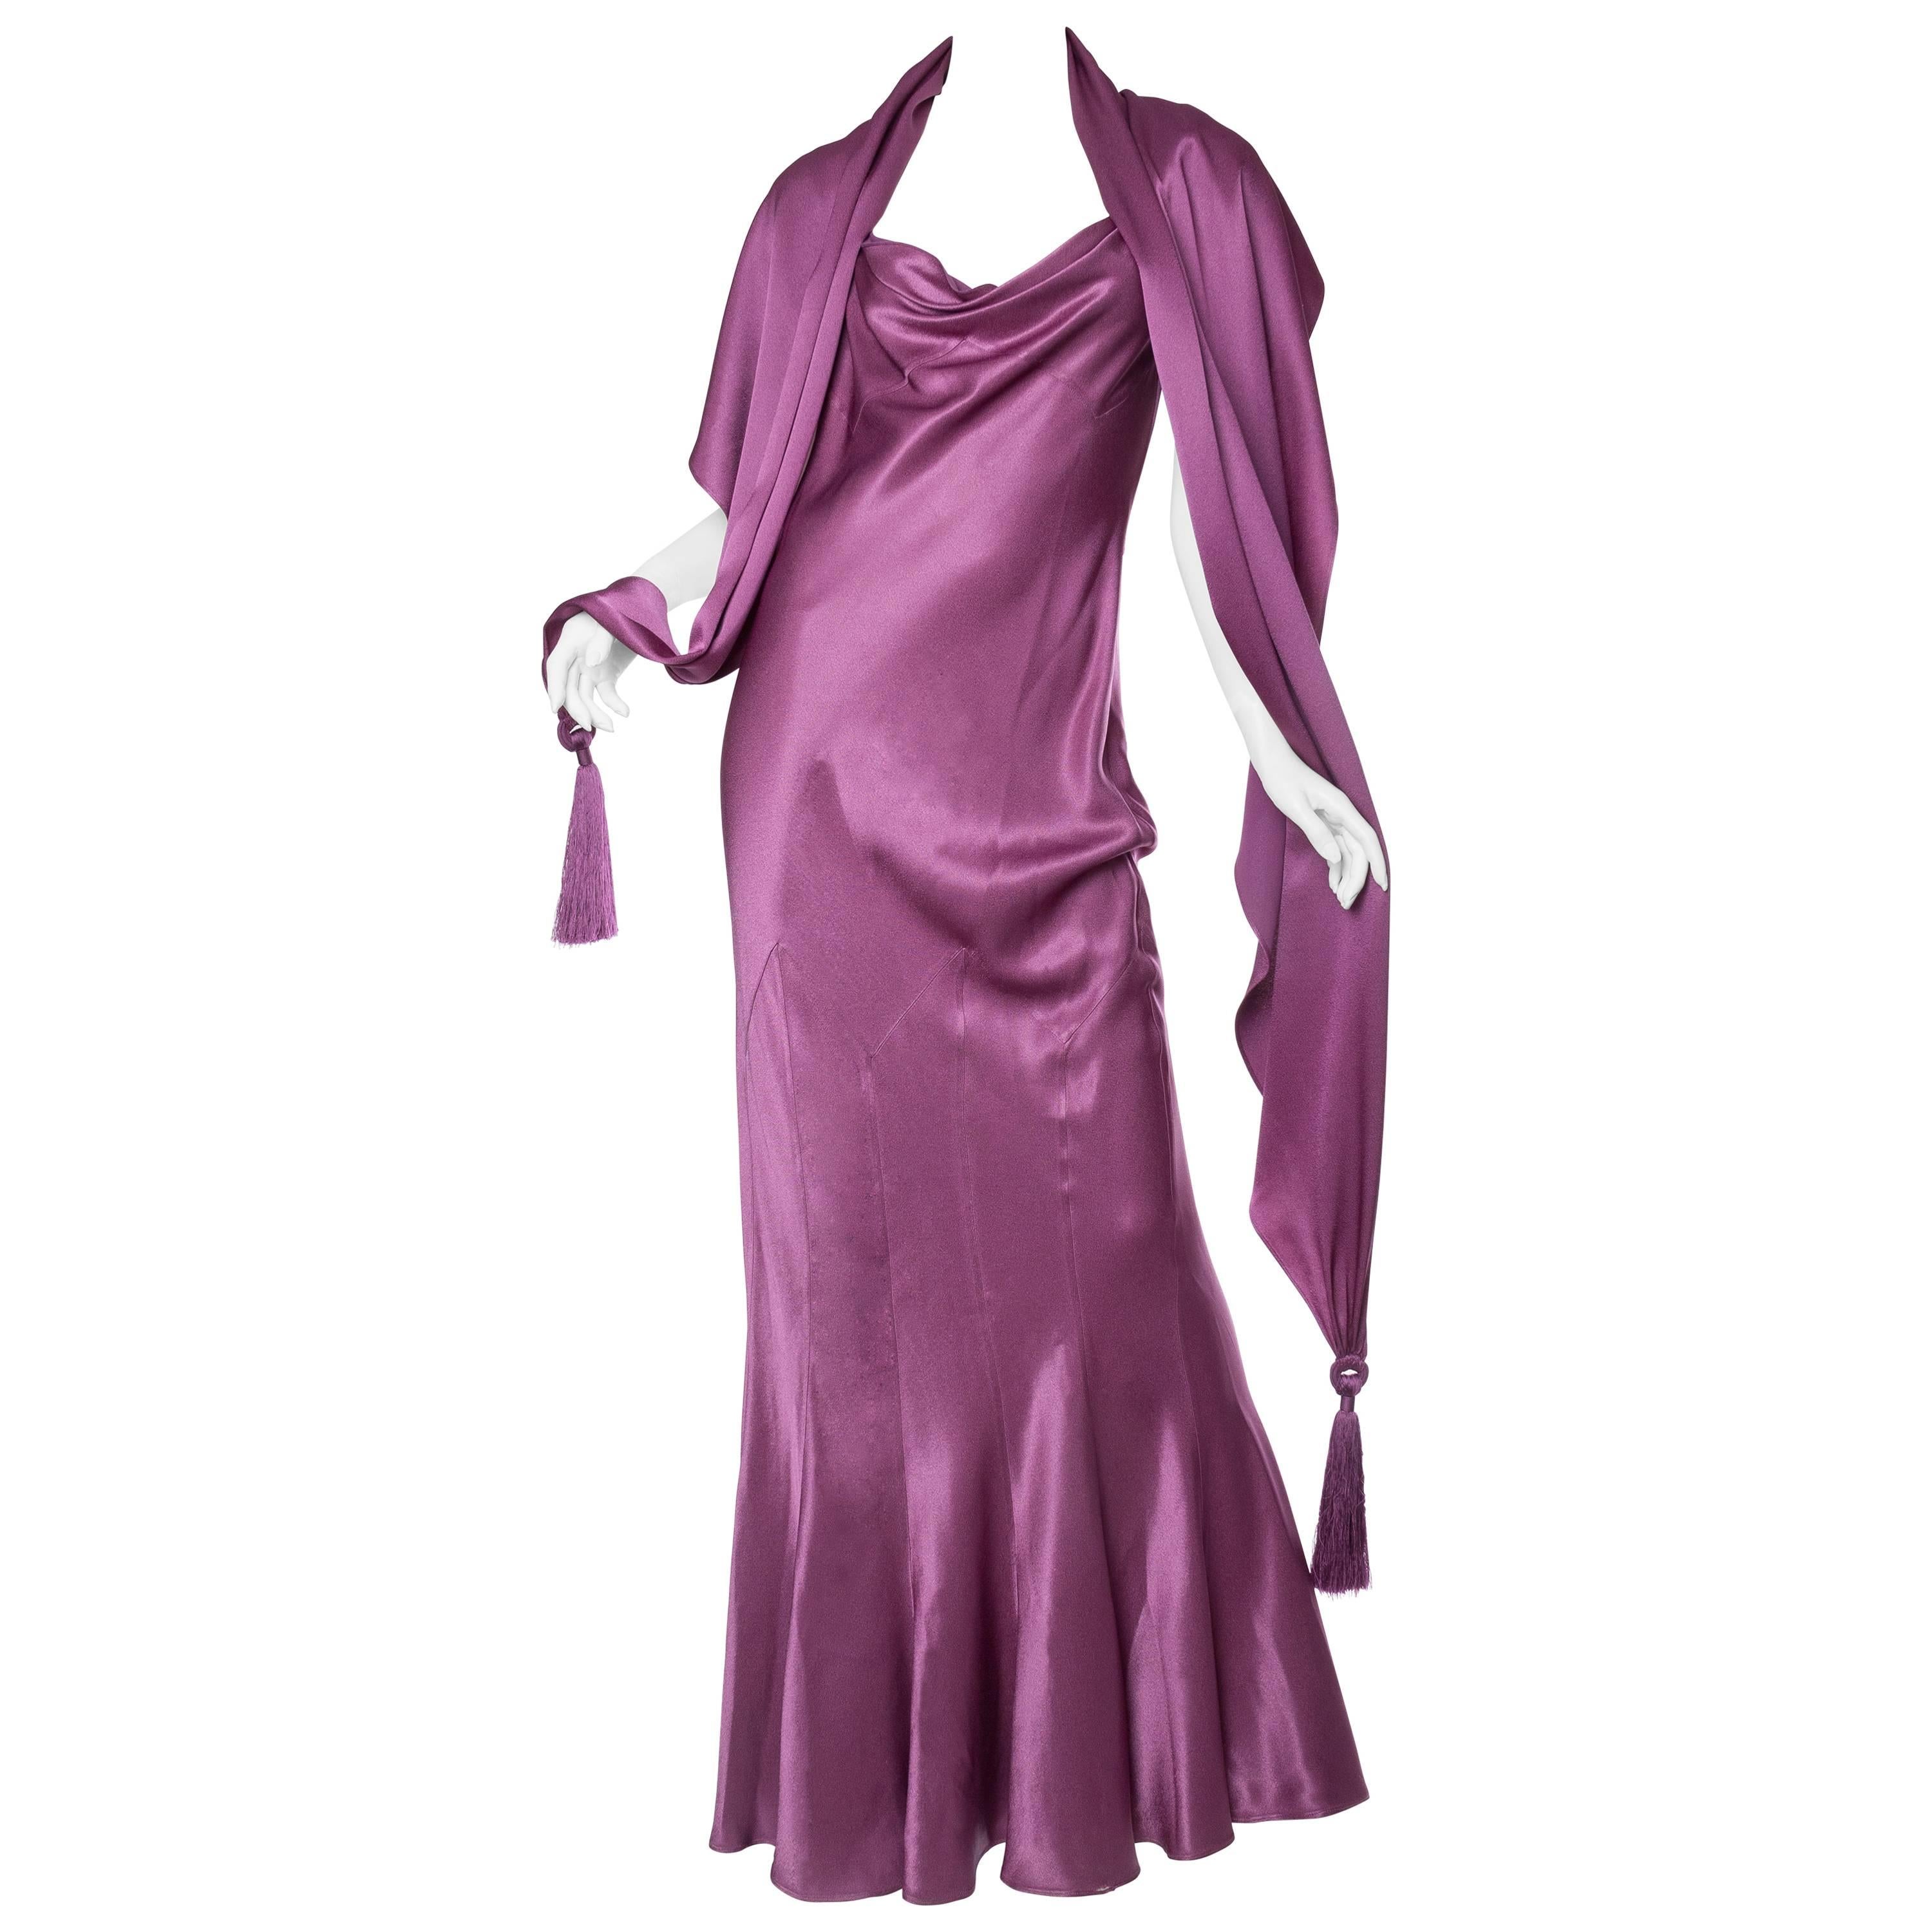 John Galliano 1930s Style Bias Cut Satin Gown with Matching Stole